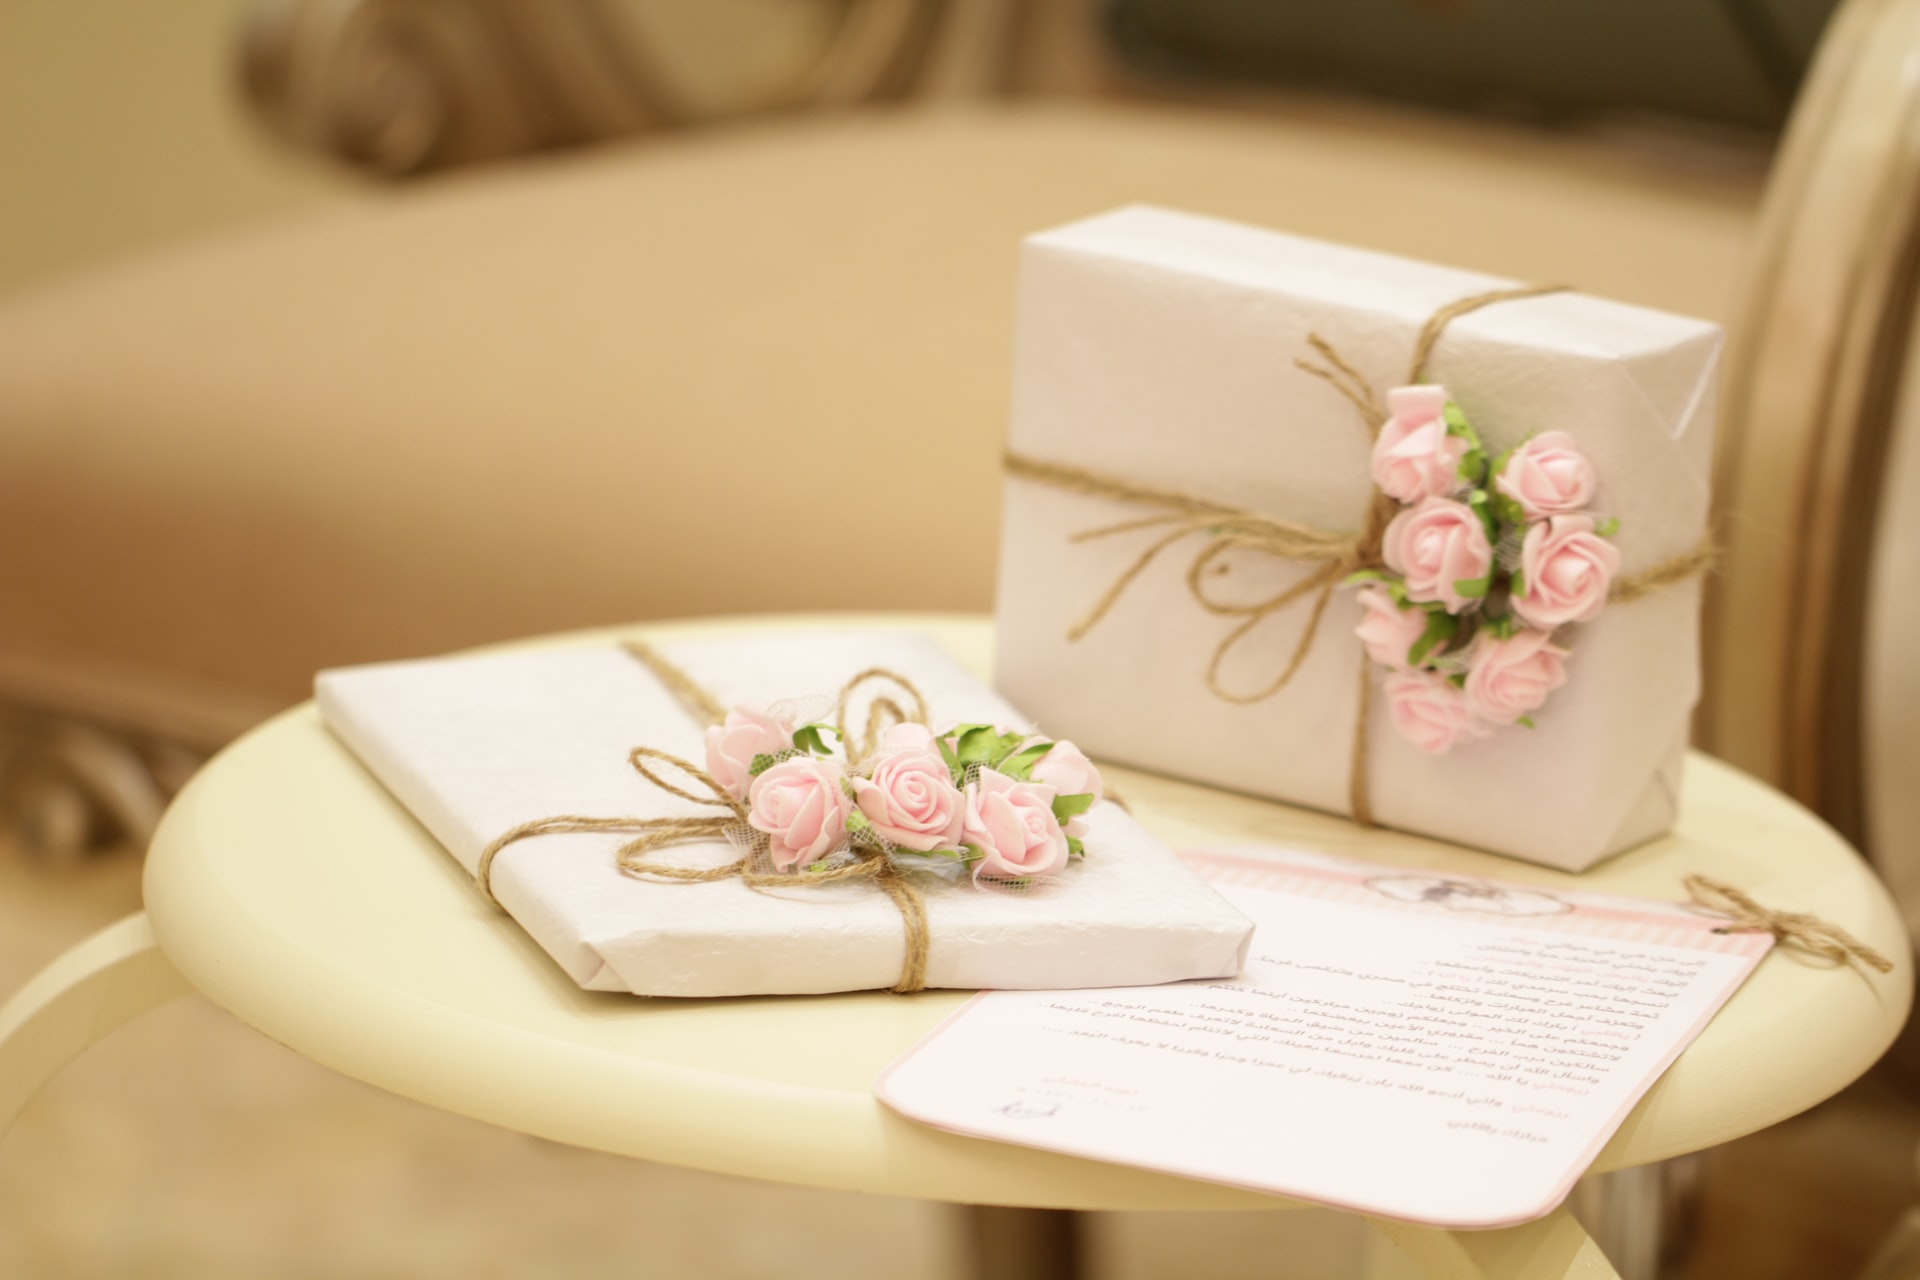 3 Important Factors To Consider When Choosing Gifts For Someone